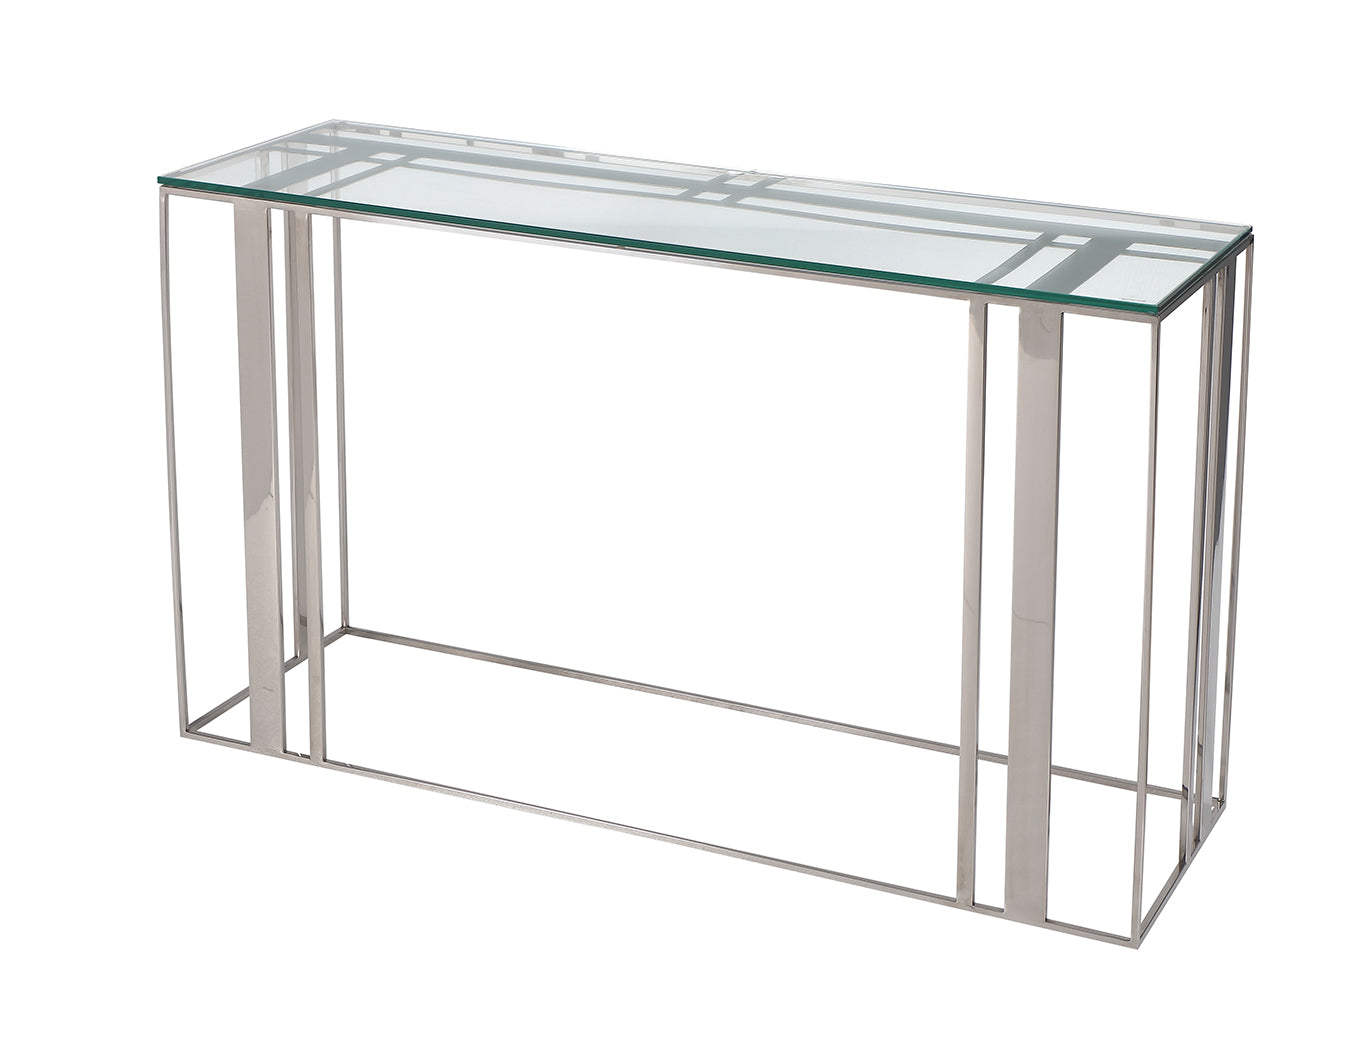  LiangAndEimilLarge-Liang & Eimil Lafayette Console Table Polished Stainless Steel-Clear 77 